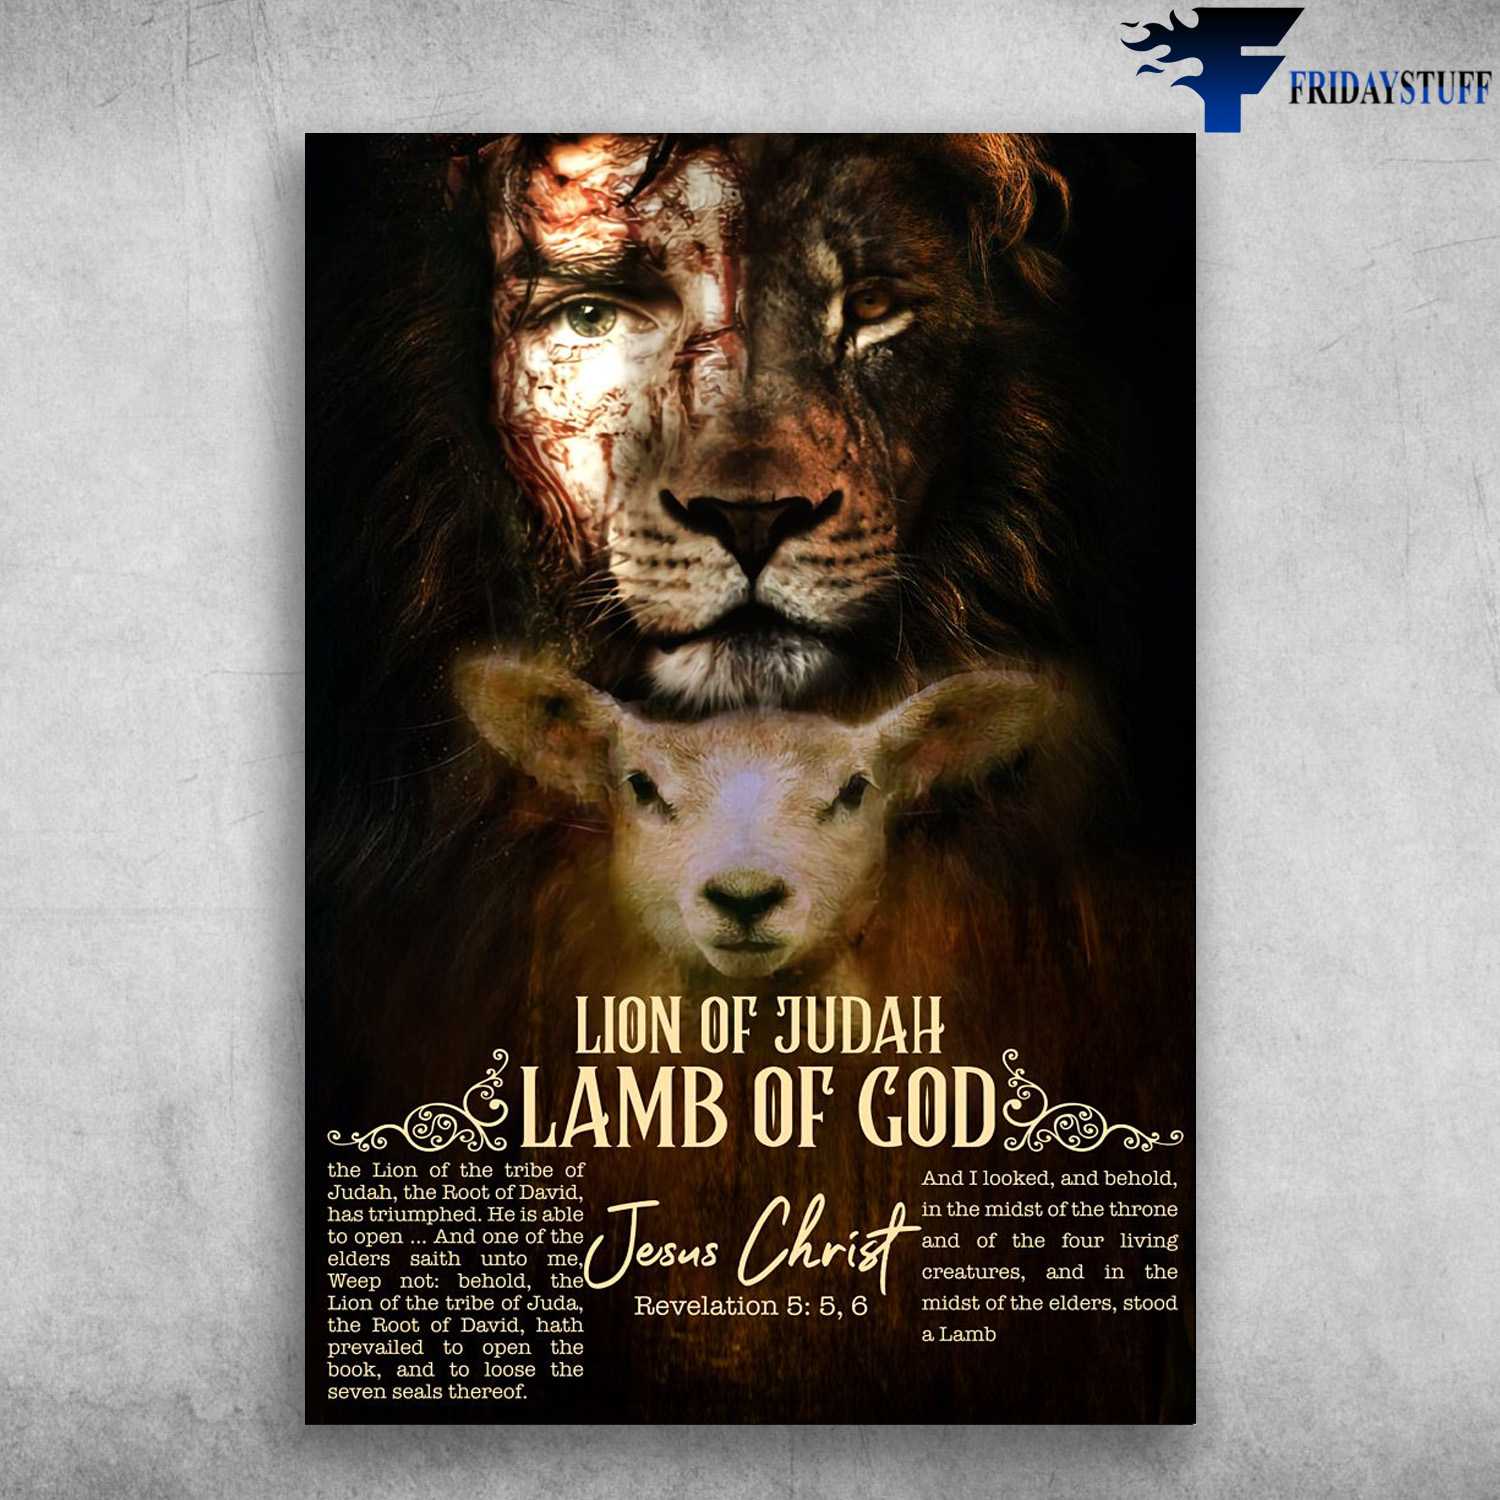 Lion Of Judah - Lamb Of God, The Lion Of The Tribe Of Judah, The Root Of David, Has Triumphed, Jesus Christ, And I Looked, And Behold, In The Midst Of The Throne